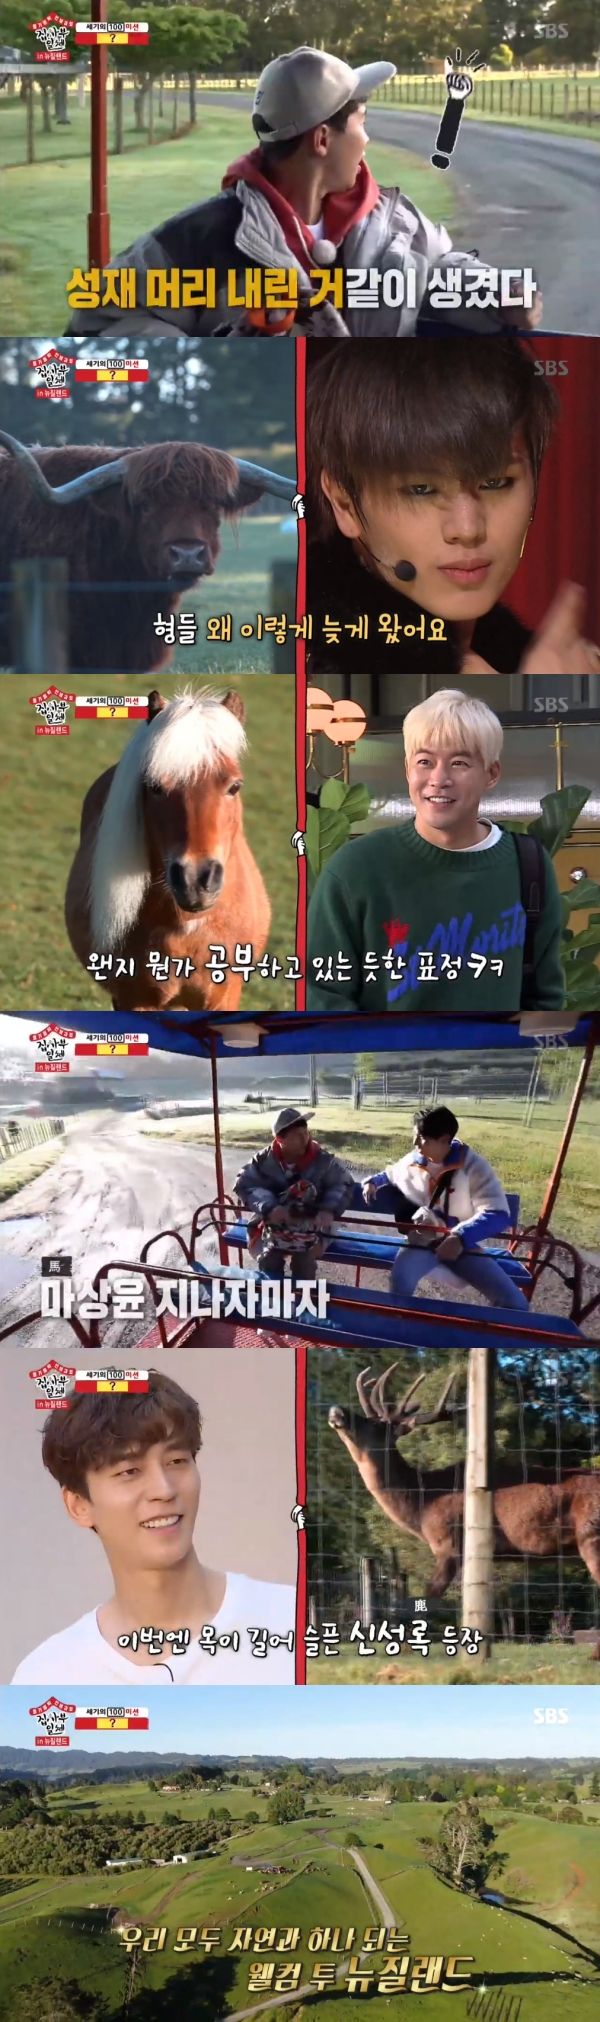 Yang Se-hyeong X Lee Seung-gi found member Similiar animalOn SBS All The Butlers broadcast on the 8th, Yang Se-hyeong and Lee Seung-gi, who visited New Zealand to meet the master, met the members Similiar animals.On the day of the broadcast, Yang Se-hyeong of New Zealand Airport reasoned about the master and said, He called it here.Its going to be tough in the history of All The Butlers, he said.Yang Se-hyeong and Lee Seung-gi, who were watching the New Zealand scenery, discovered the member Similiar animal.You look like Yook Sungjaes head is down, it doesnt even move like a holy material, said Lee Seung-gi, who discovered the cow.When I found the horse, I laughed, saying, It is the same as when I dyed Lee Sang-yoon.Yang Se-hyeong found the deer and said, Shin Sung-rok is a brother. There are comrades everywhere.